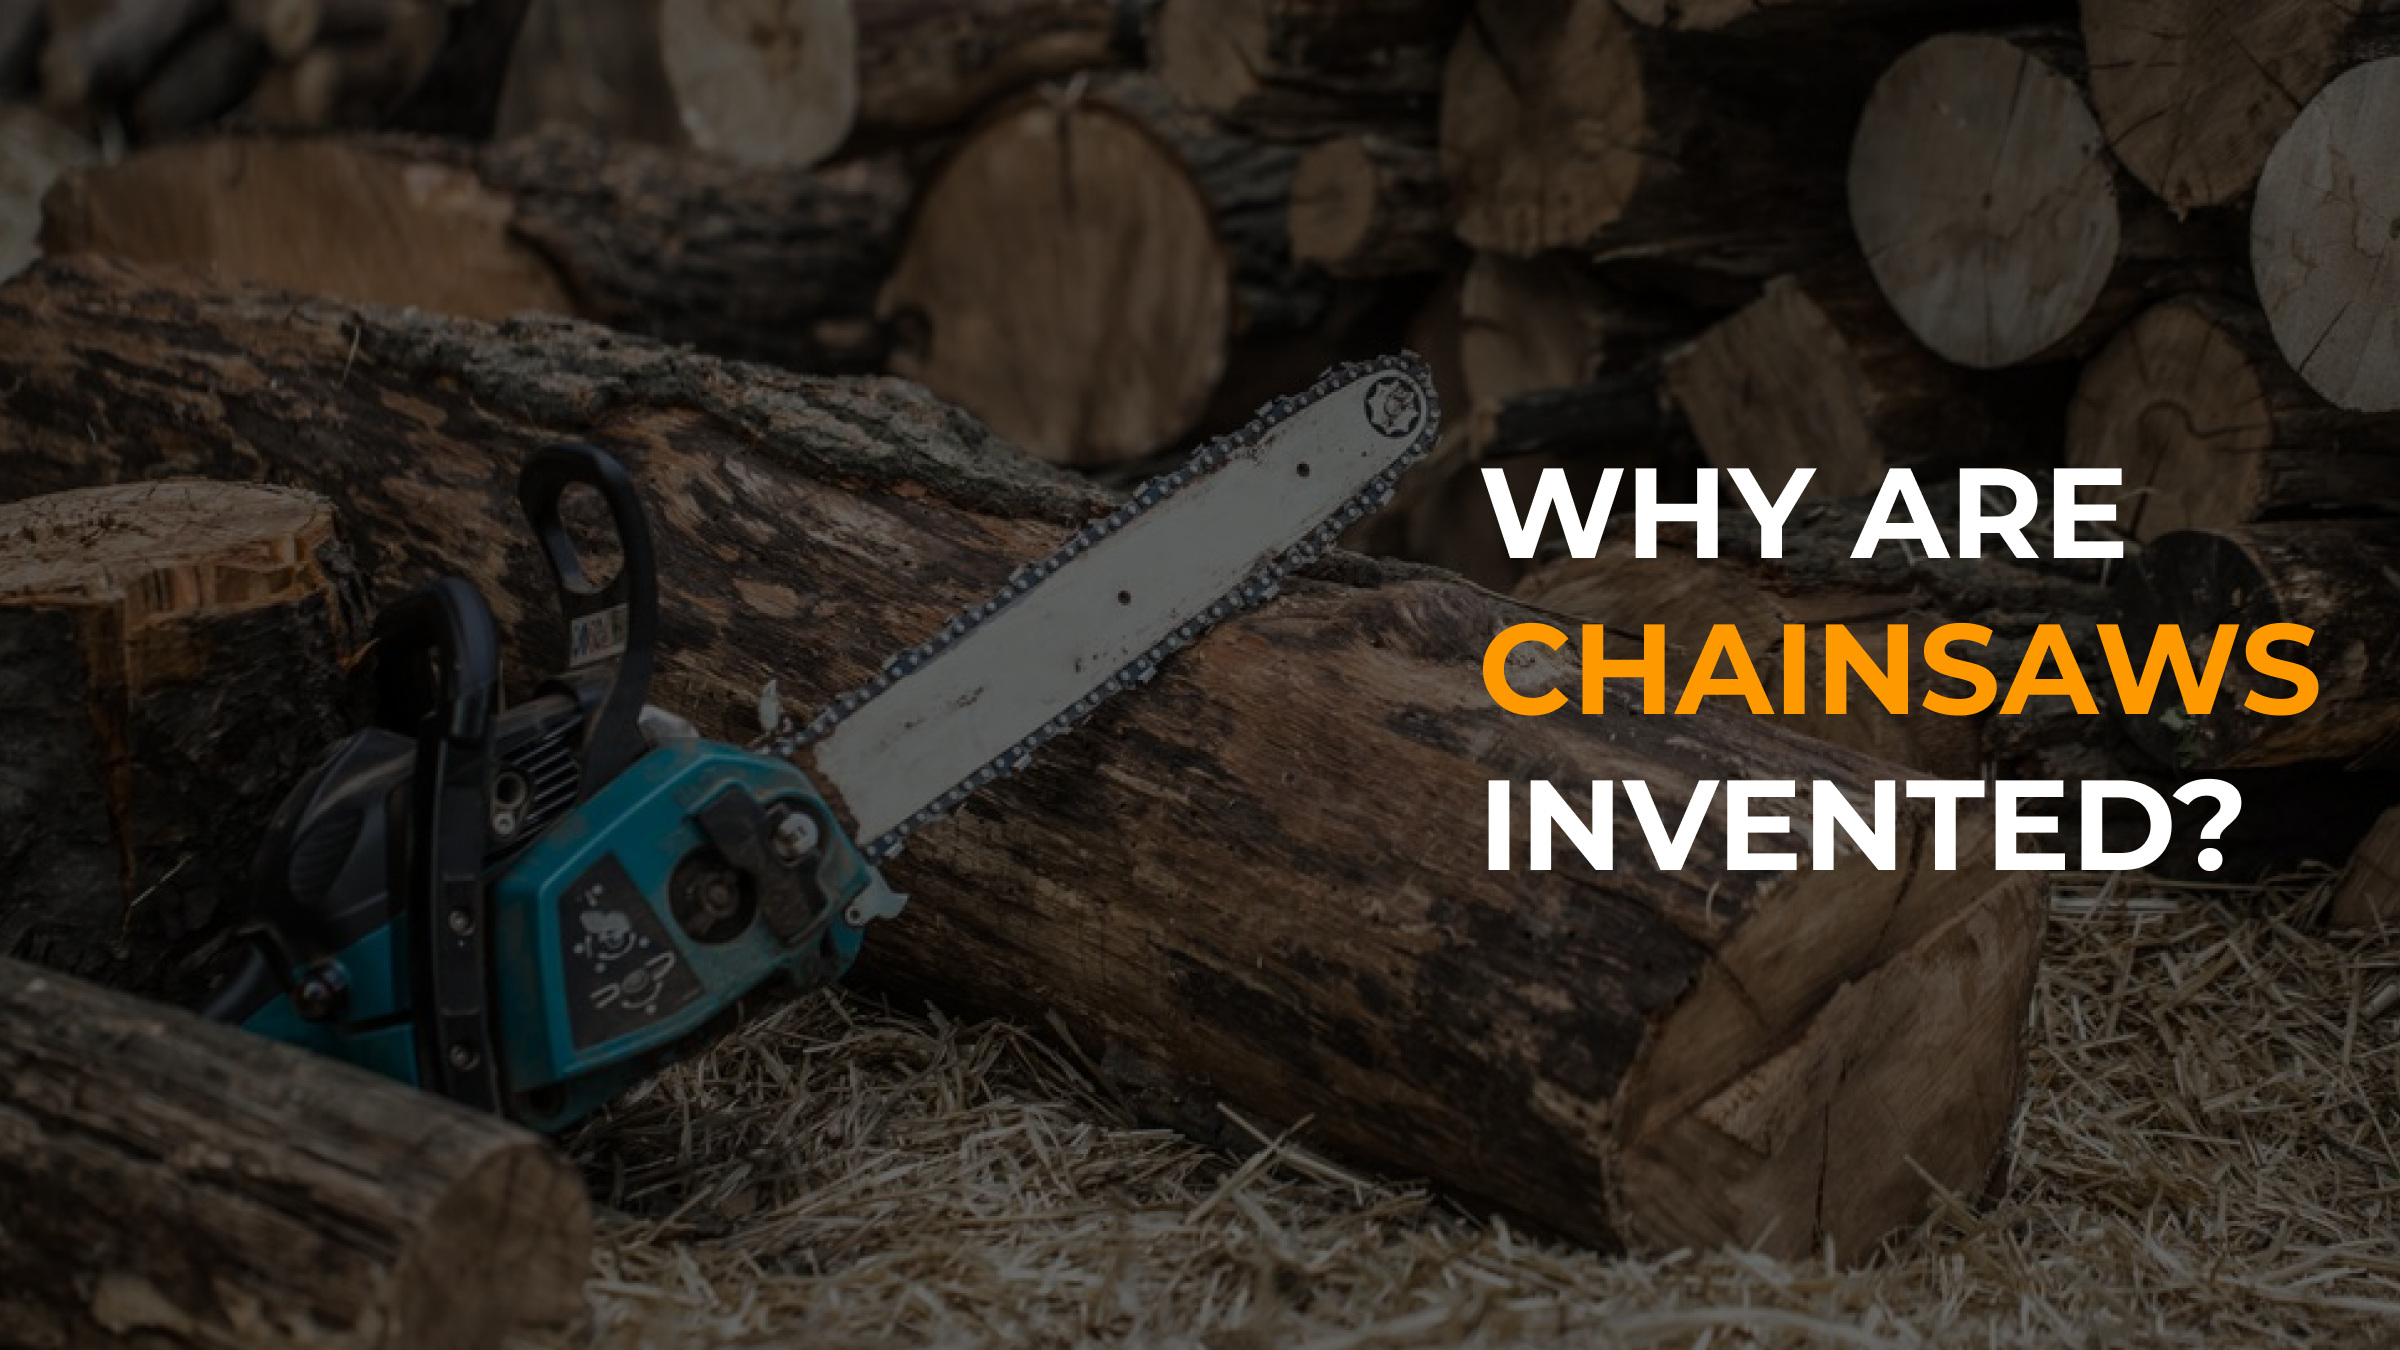 Why Are Chainsaws Invented? How Did They Use The First Chainsaw?